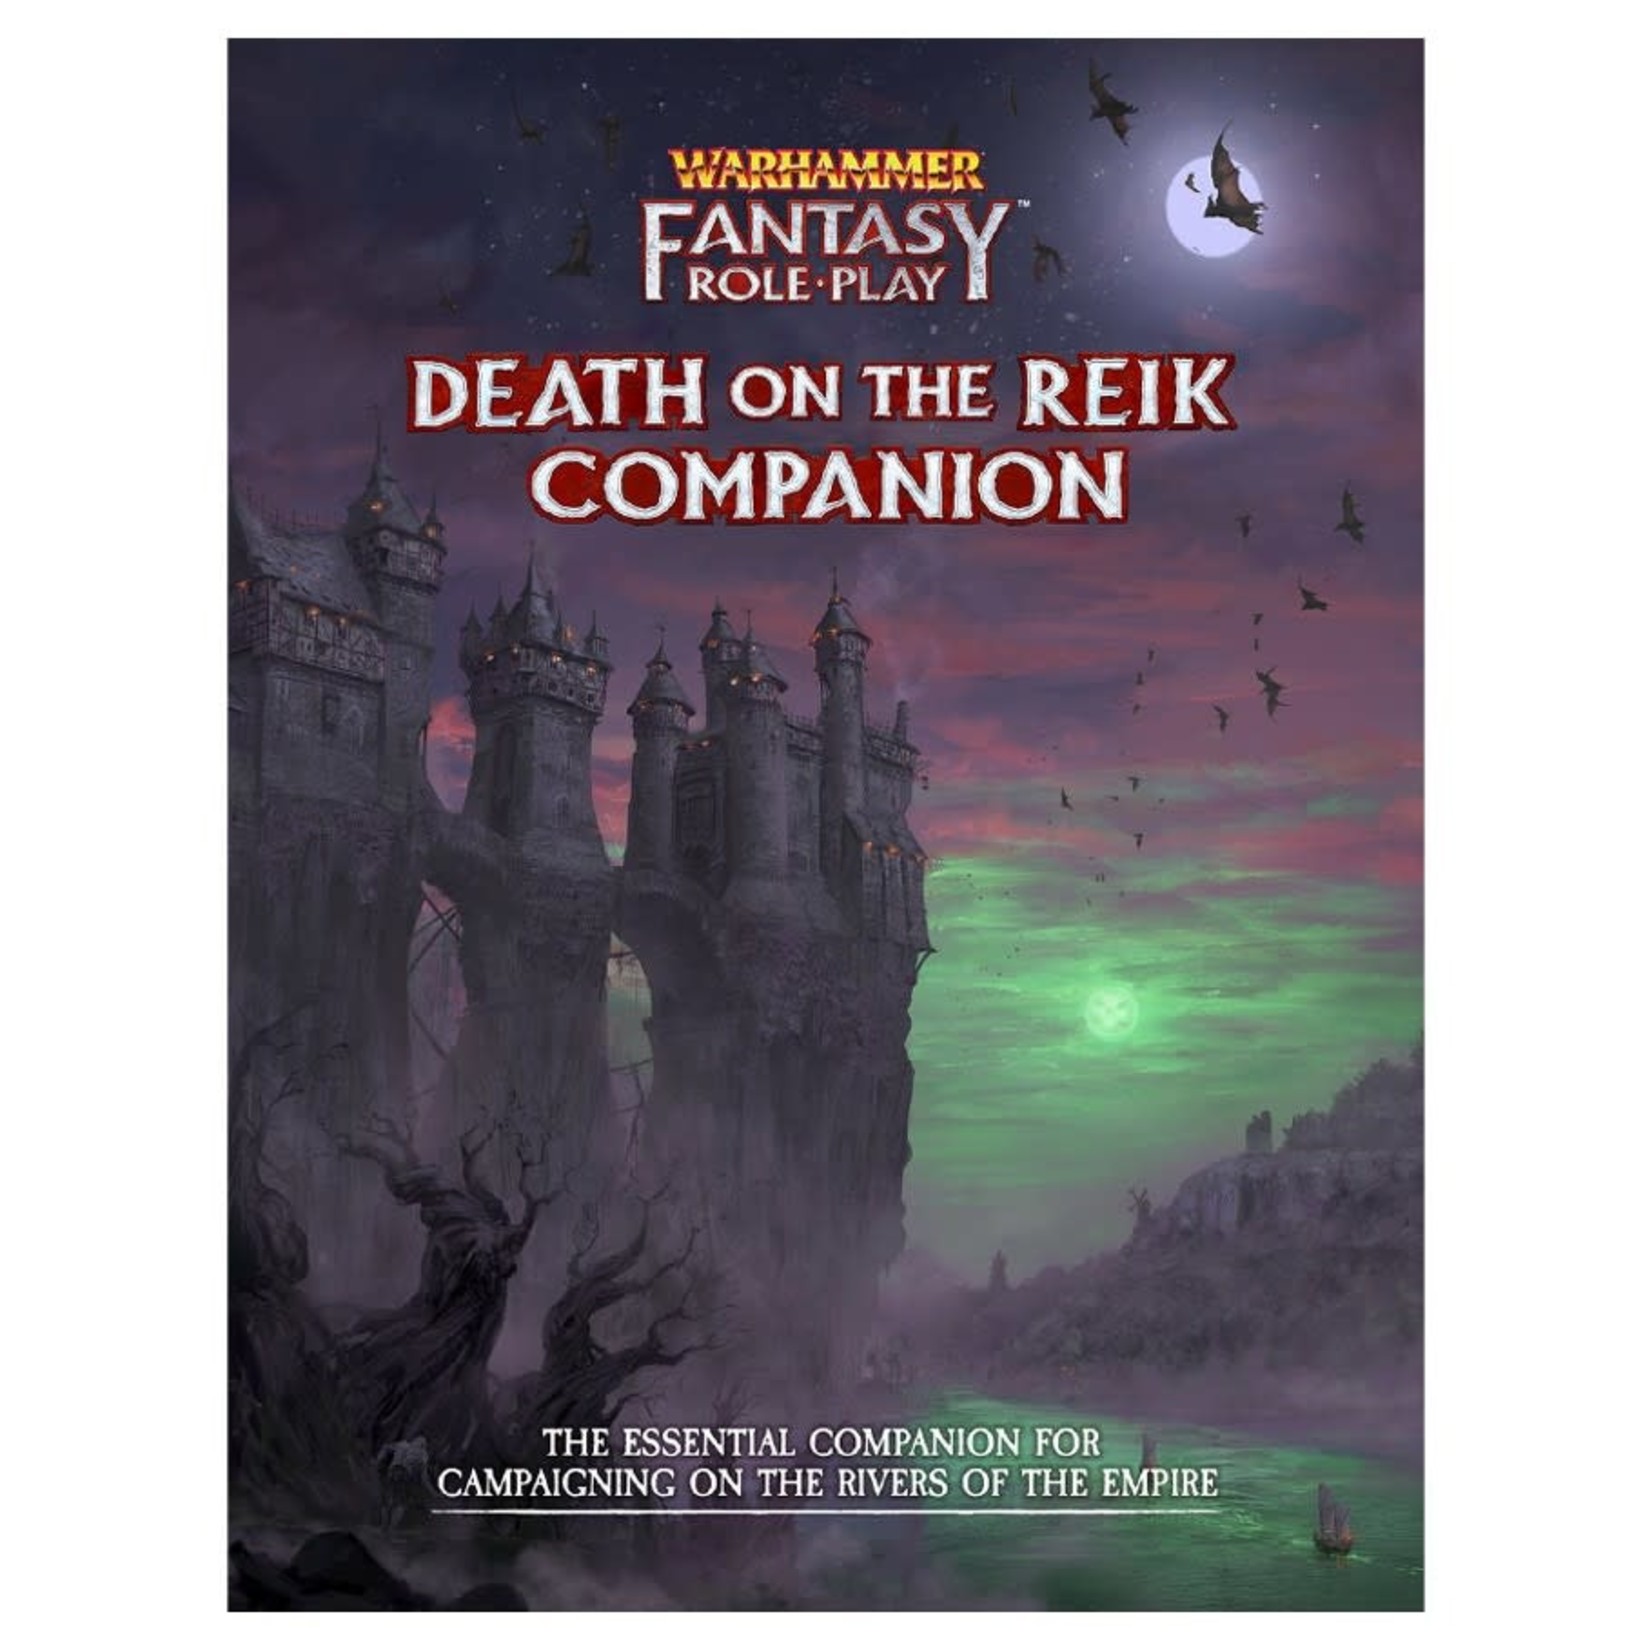 Cubicle 7 Warhammer Fantasy 4E Enemy Within Campaign Vol 2 Death on The Reik Companion